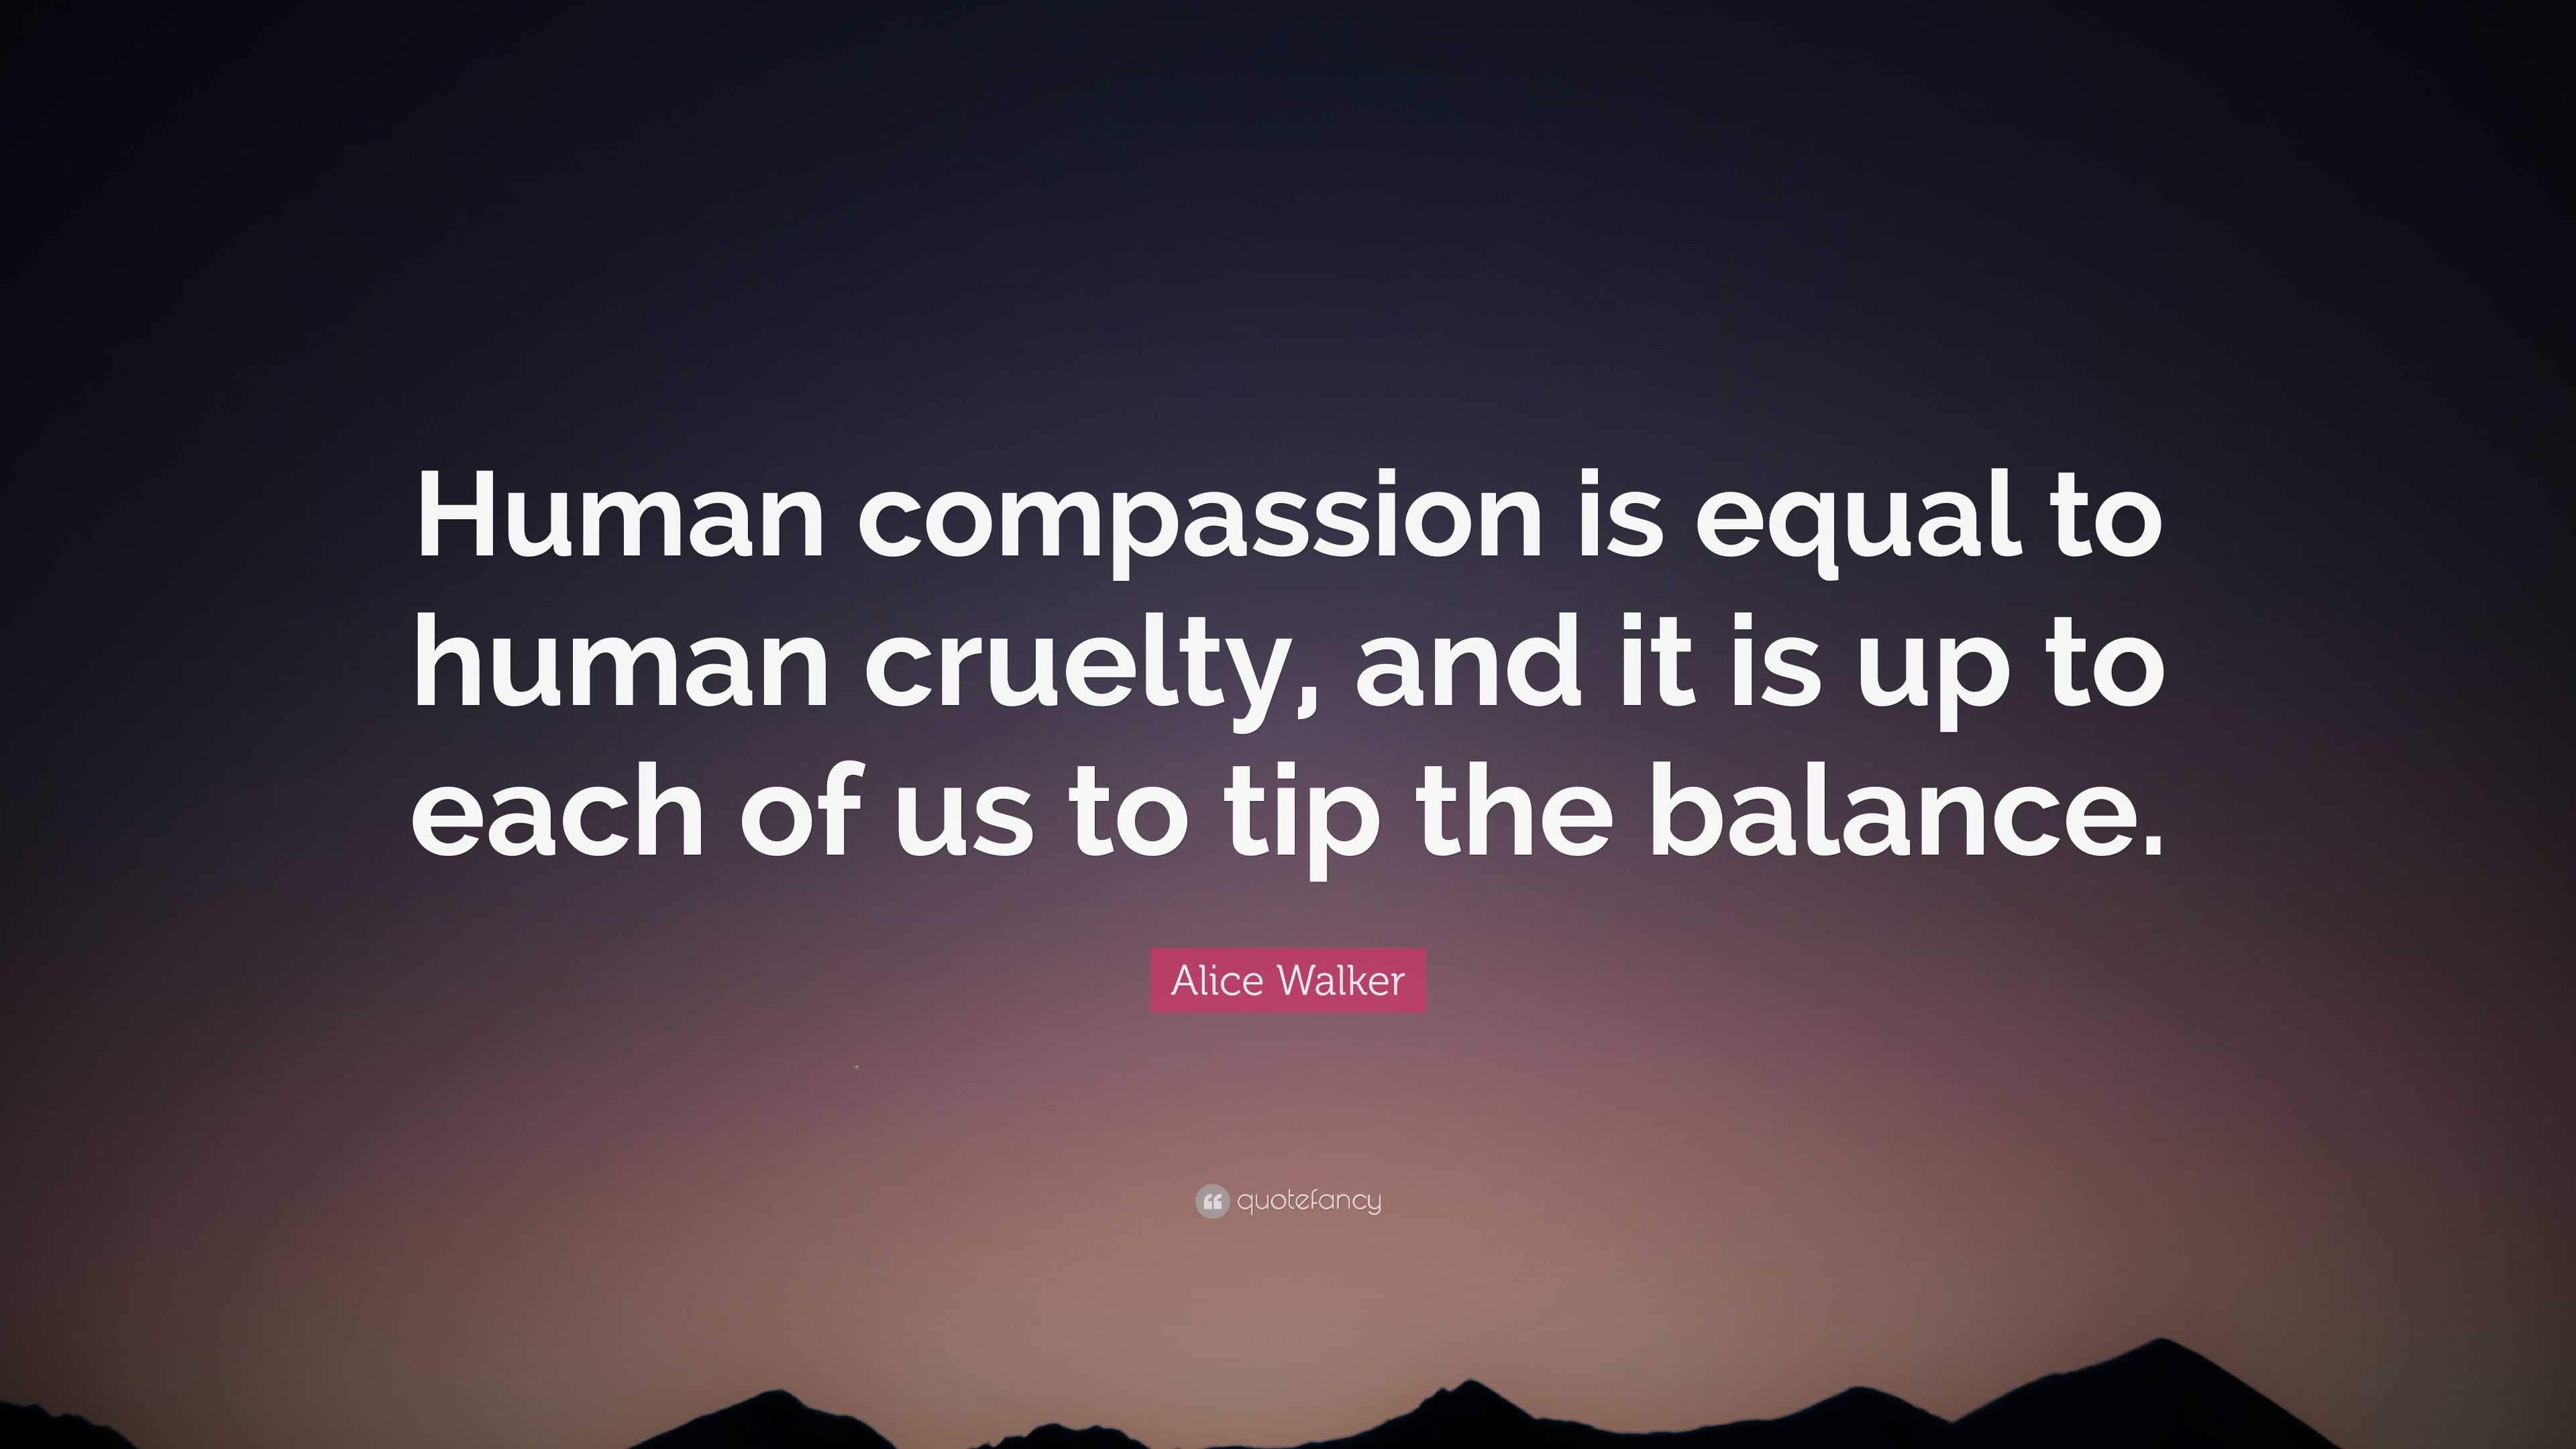 Alice Walker Quote: “Human compassion is equal to human cruelty, and it ...